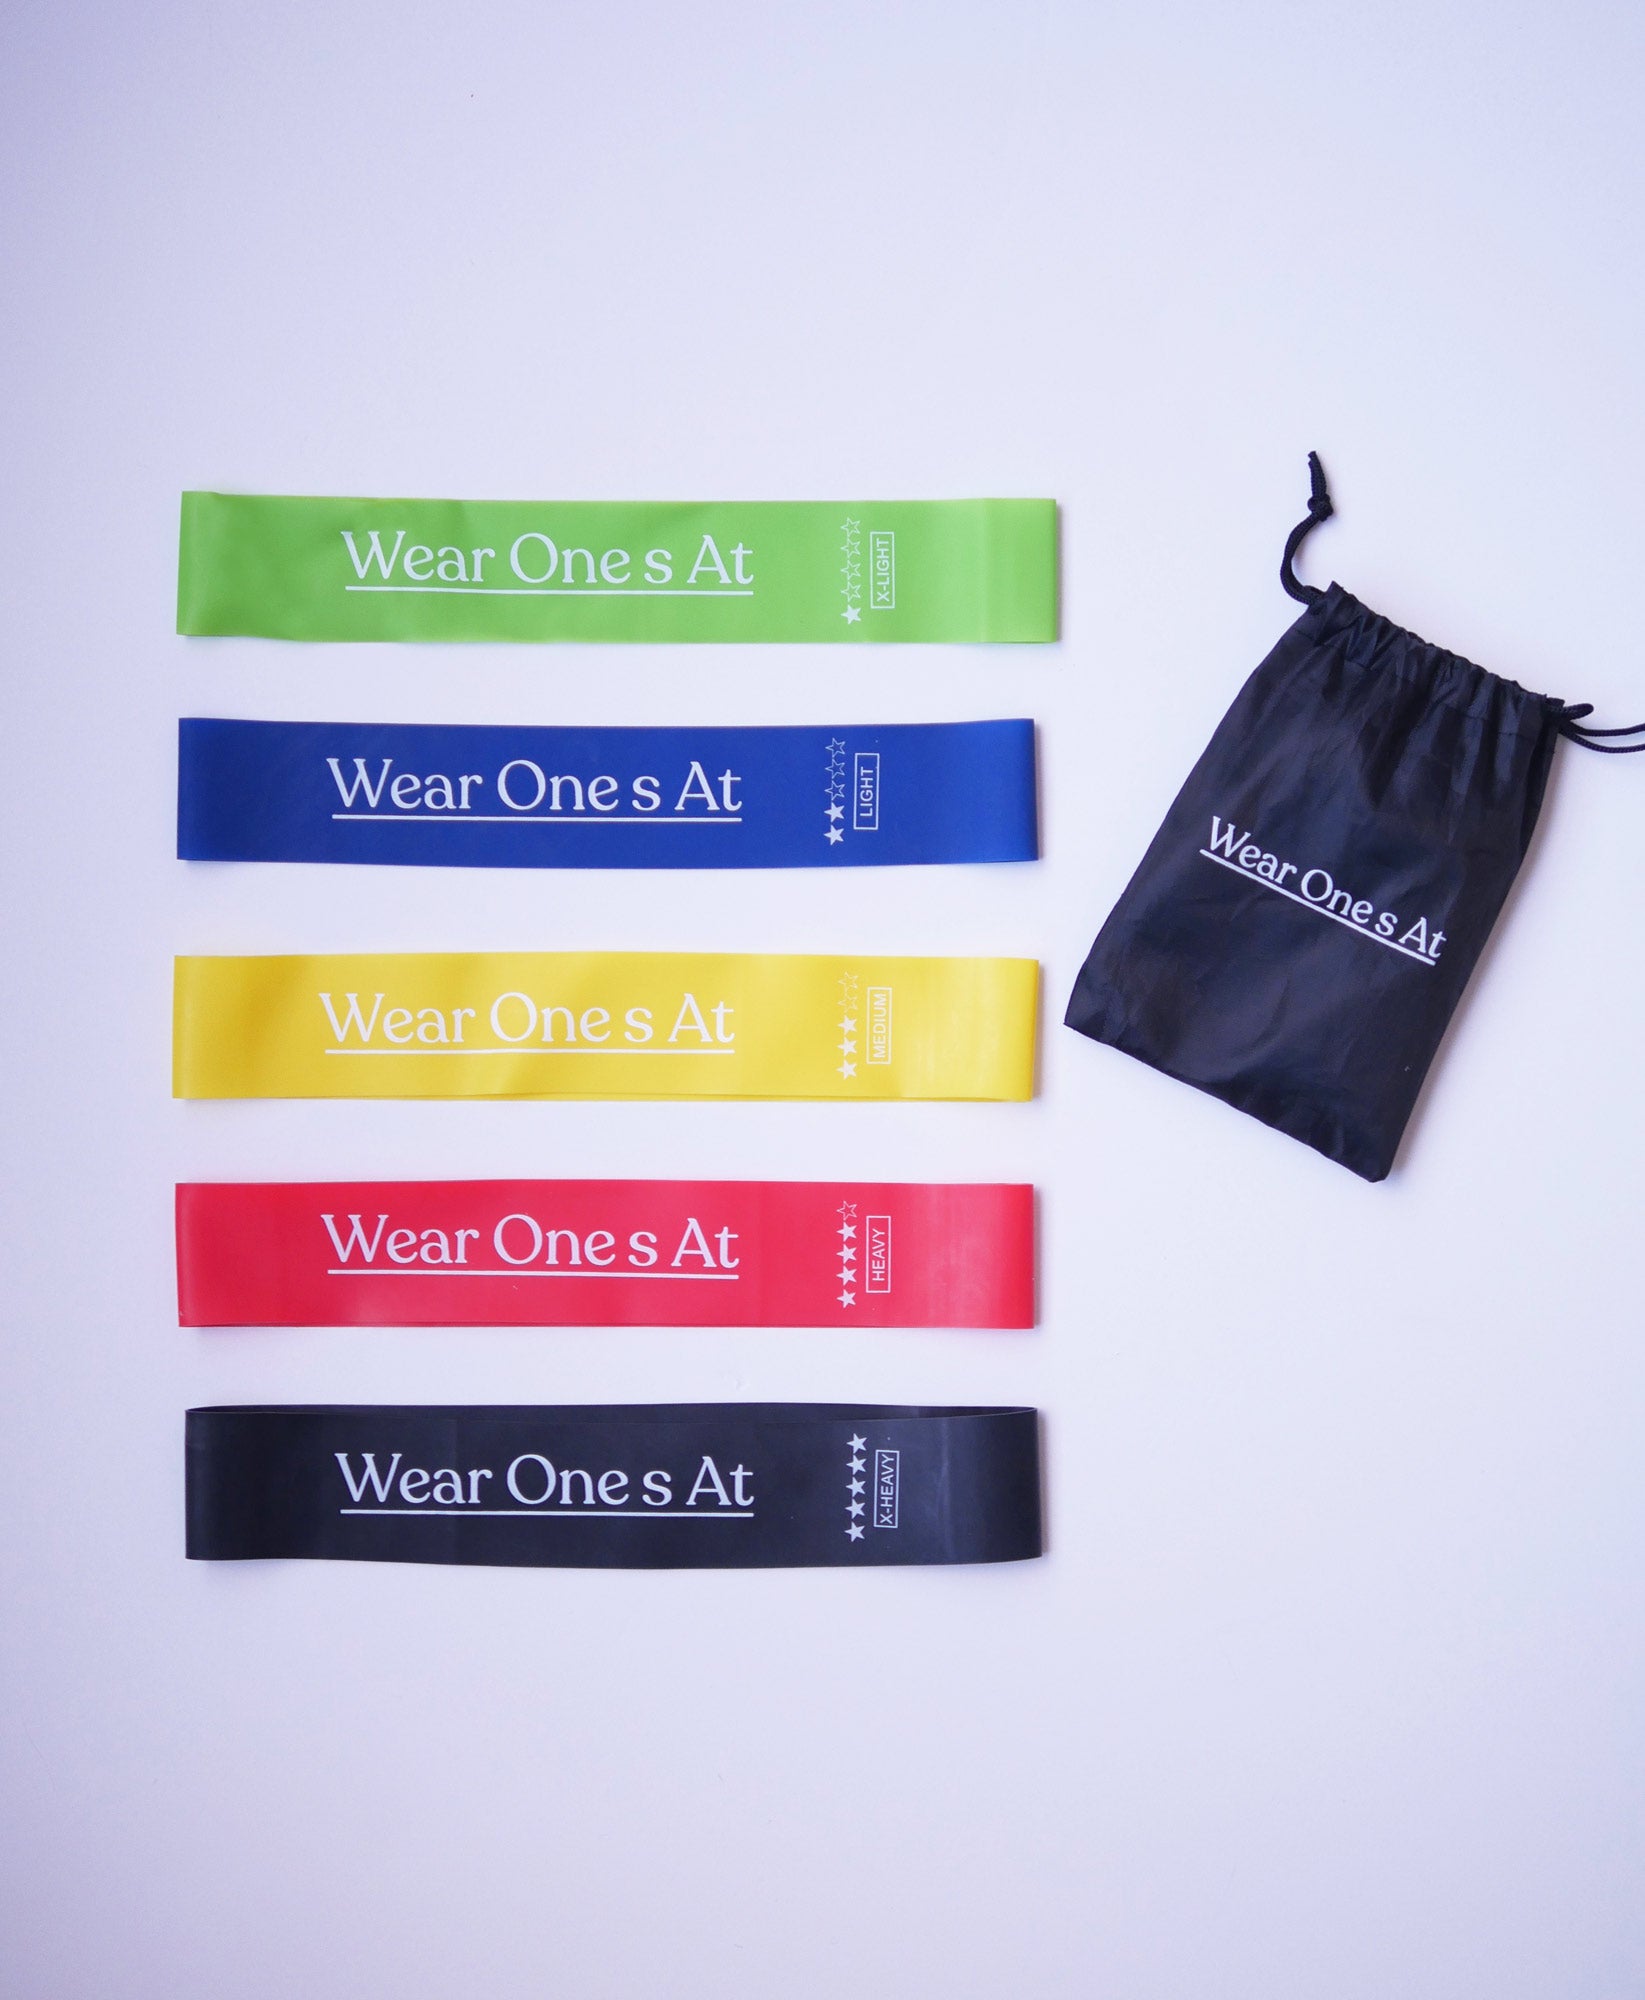 Wear One's At Resistance Bands in Multi Colors